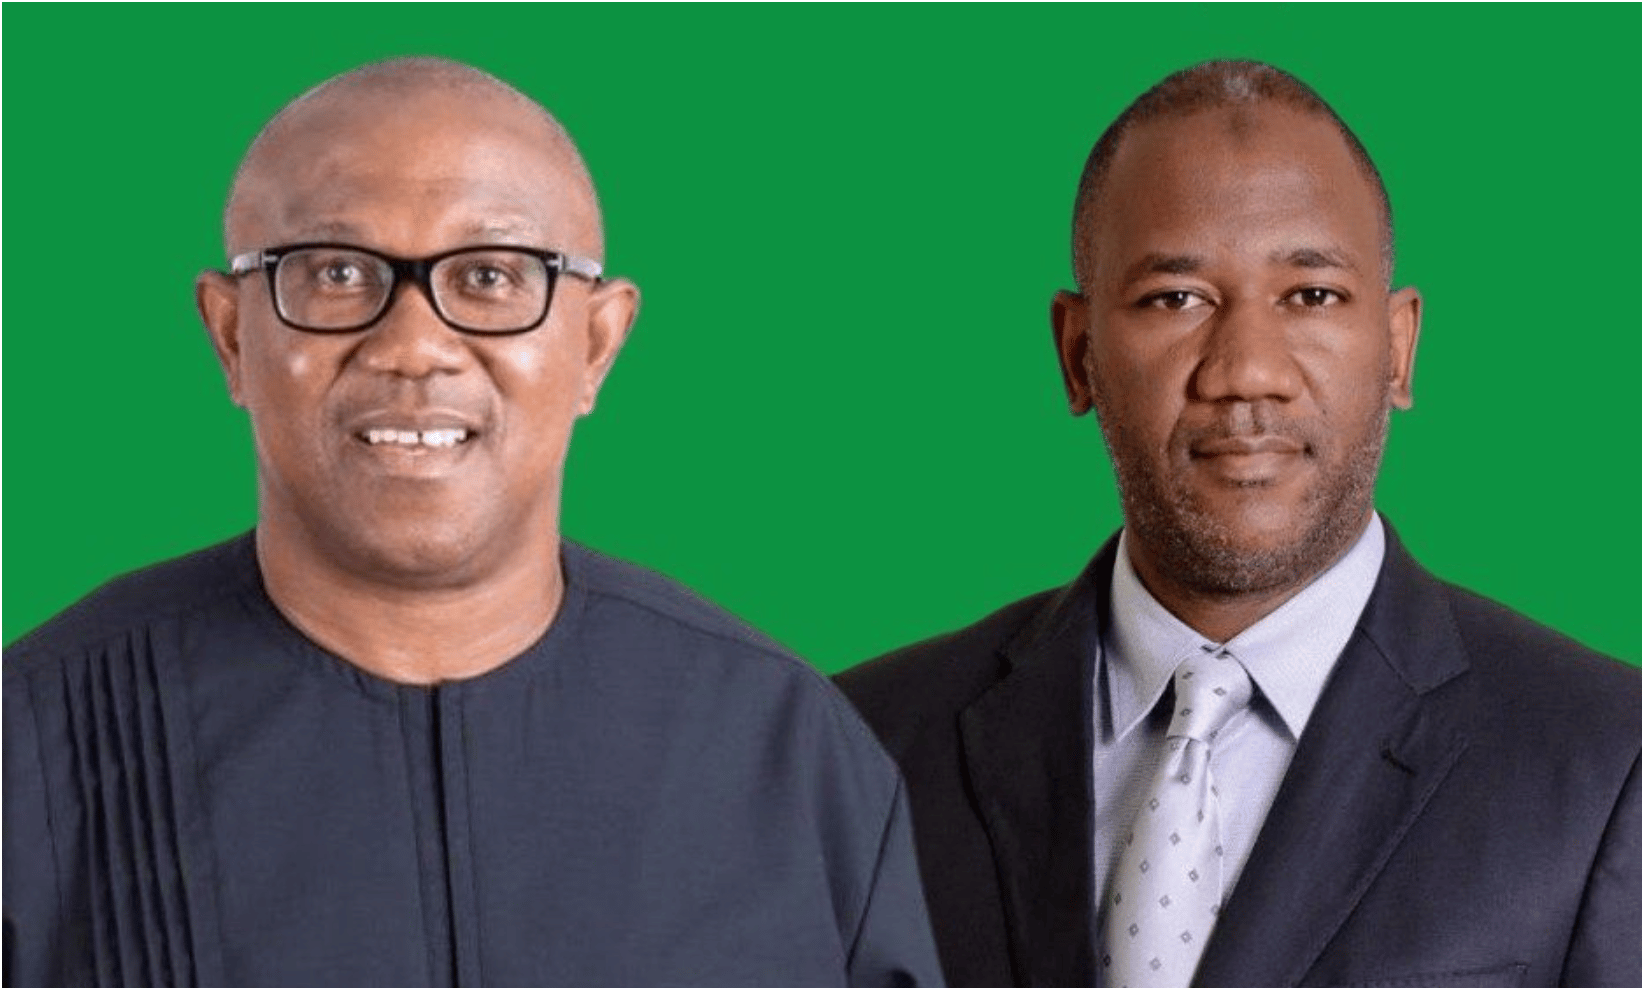 2023: I Am A Nigerian, I Don't Have Dual Citizenship - Peter Obi Reveals Why He Wants To Be President